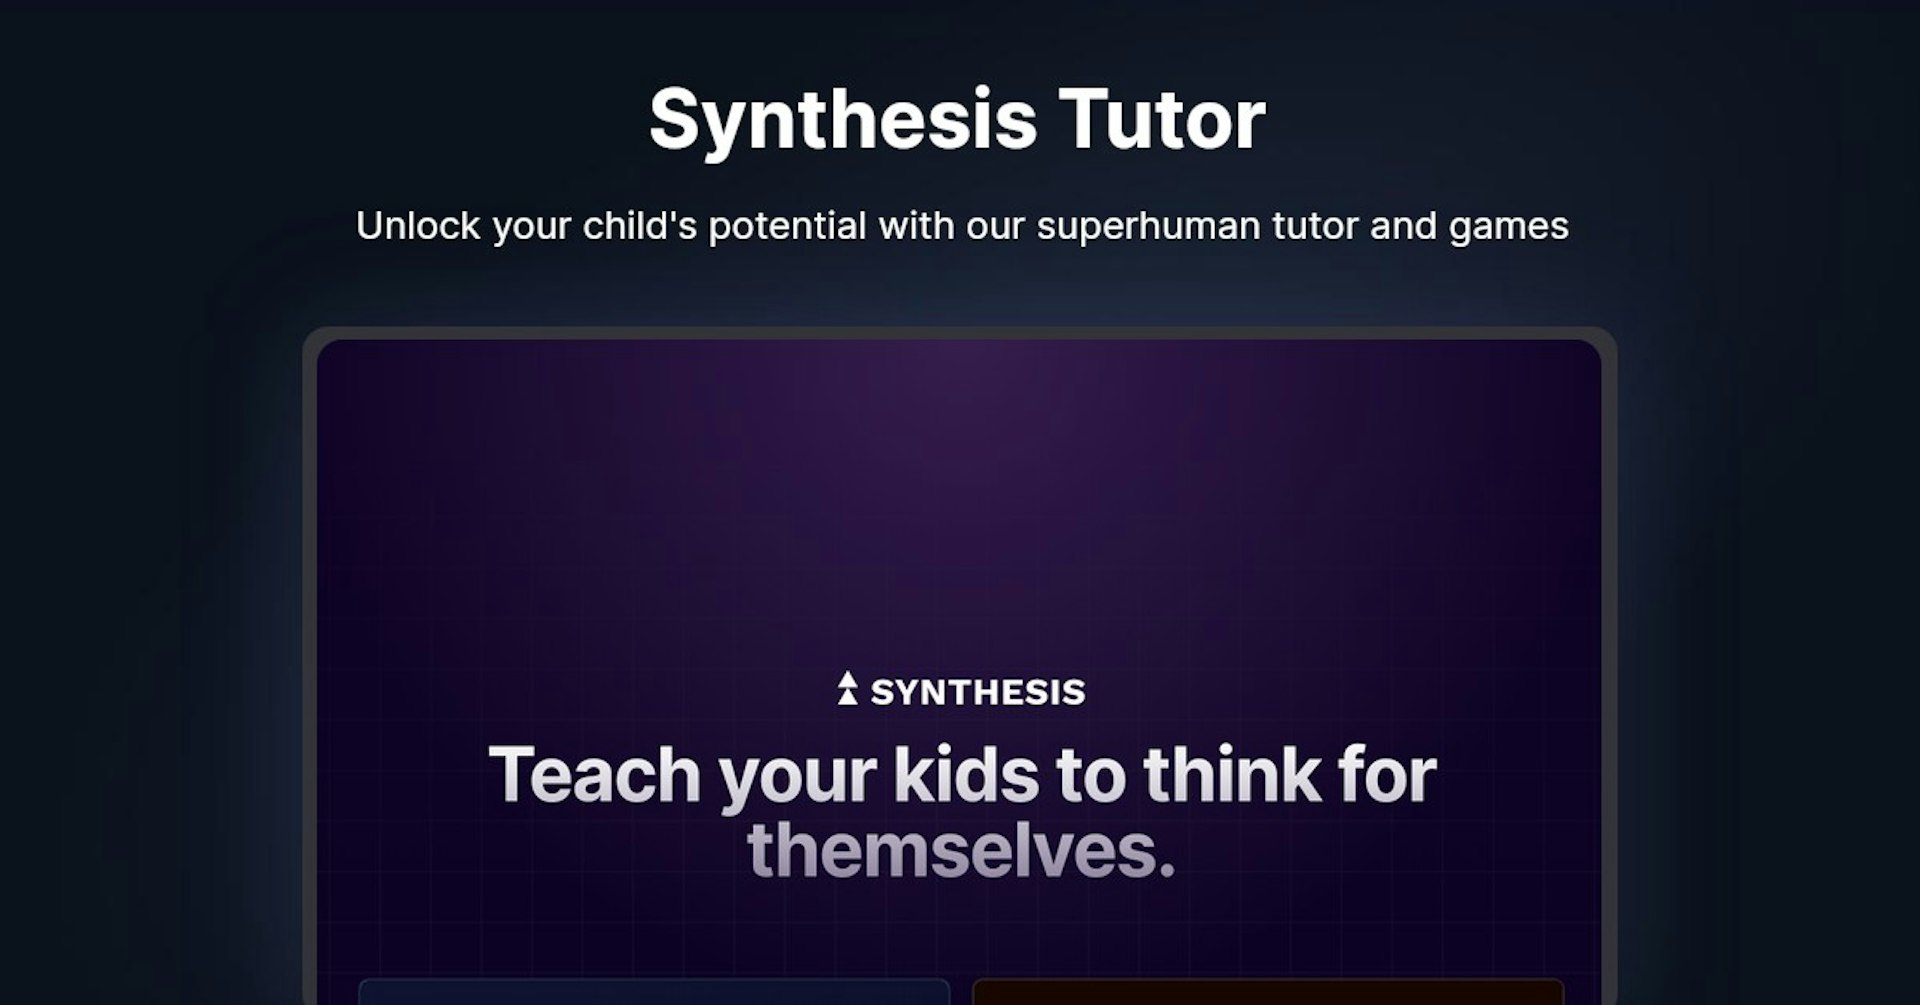 Synthesis Tutor